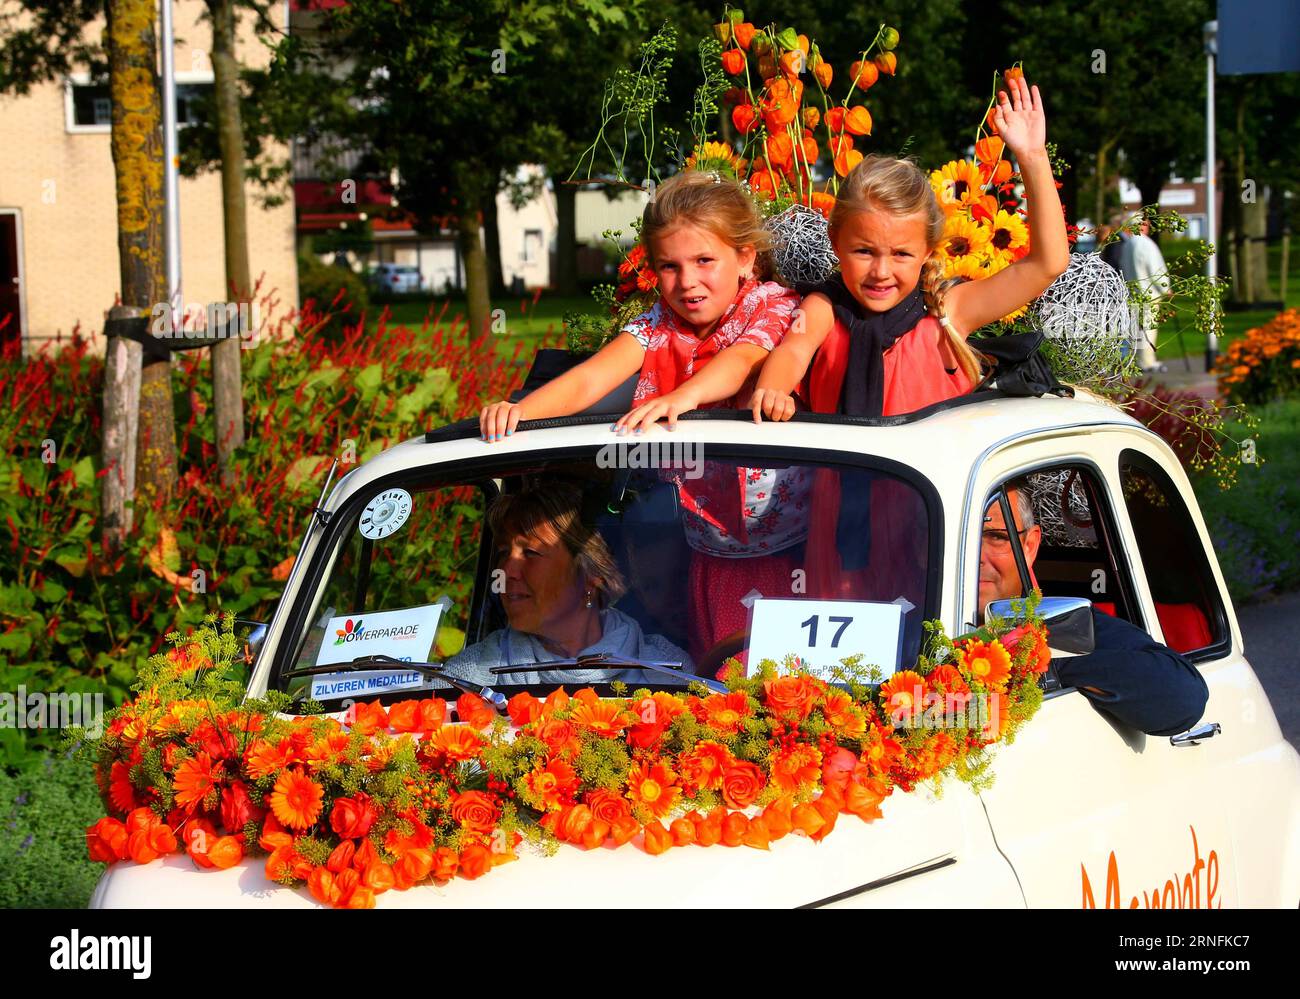 Blumenparade in Noordwijk (160814) -- THE HAGUE, Aug. 13, 2016 -- A float is seen during the Flower Parade in Noordwijk, the Netherlands, on Aug. 13, 2016. The annual Flower Parade since 1946 was held in Rijnsburg, Katwijk and Noordwijk of the Nehterlands on Saturday. ) (syq) NETHERLANDS-NOORDWIJK-FLOWER PARADE GongxBing PUBLICATIONxNOTxINxCHN   Flowers Parade in Noordwijk 160814 The Hague Aug 13 2016 a Float IS Lakes during The Flower Parade in Noordwijk The Netherlands ON Aug 13 2016 The Annual Flower Parade Since 1946 what Hero in Rijnsburg Katwijk and Noordwijk of The Nehterlands ON Saturd Stock Photo